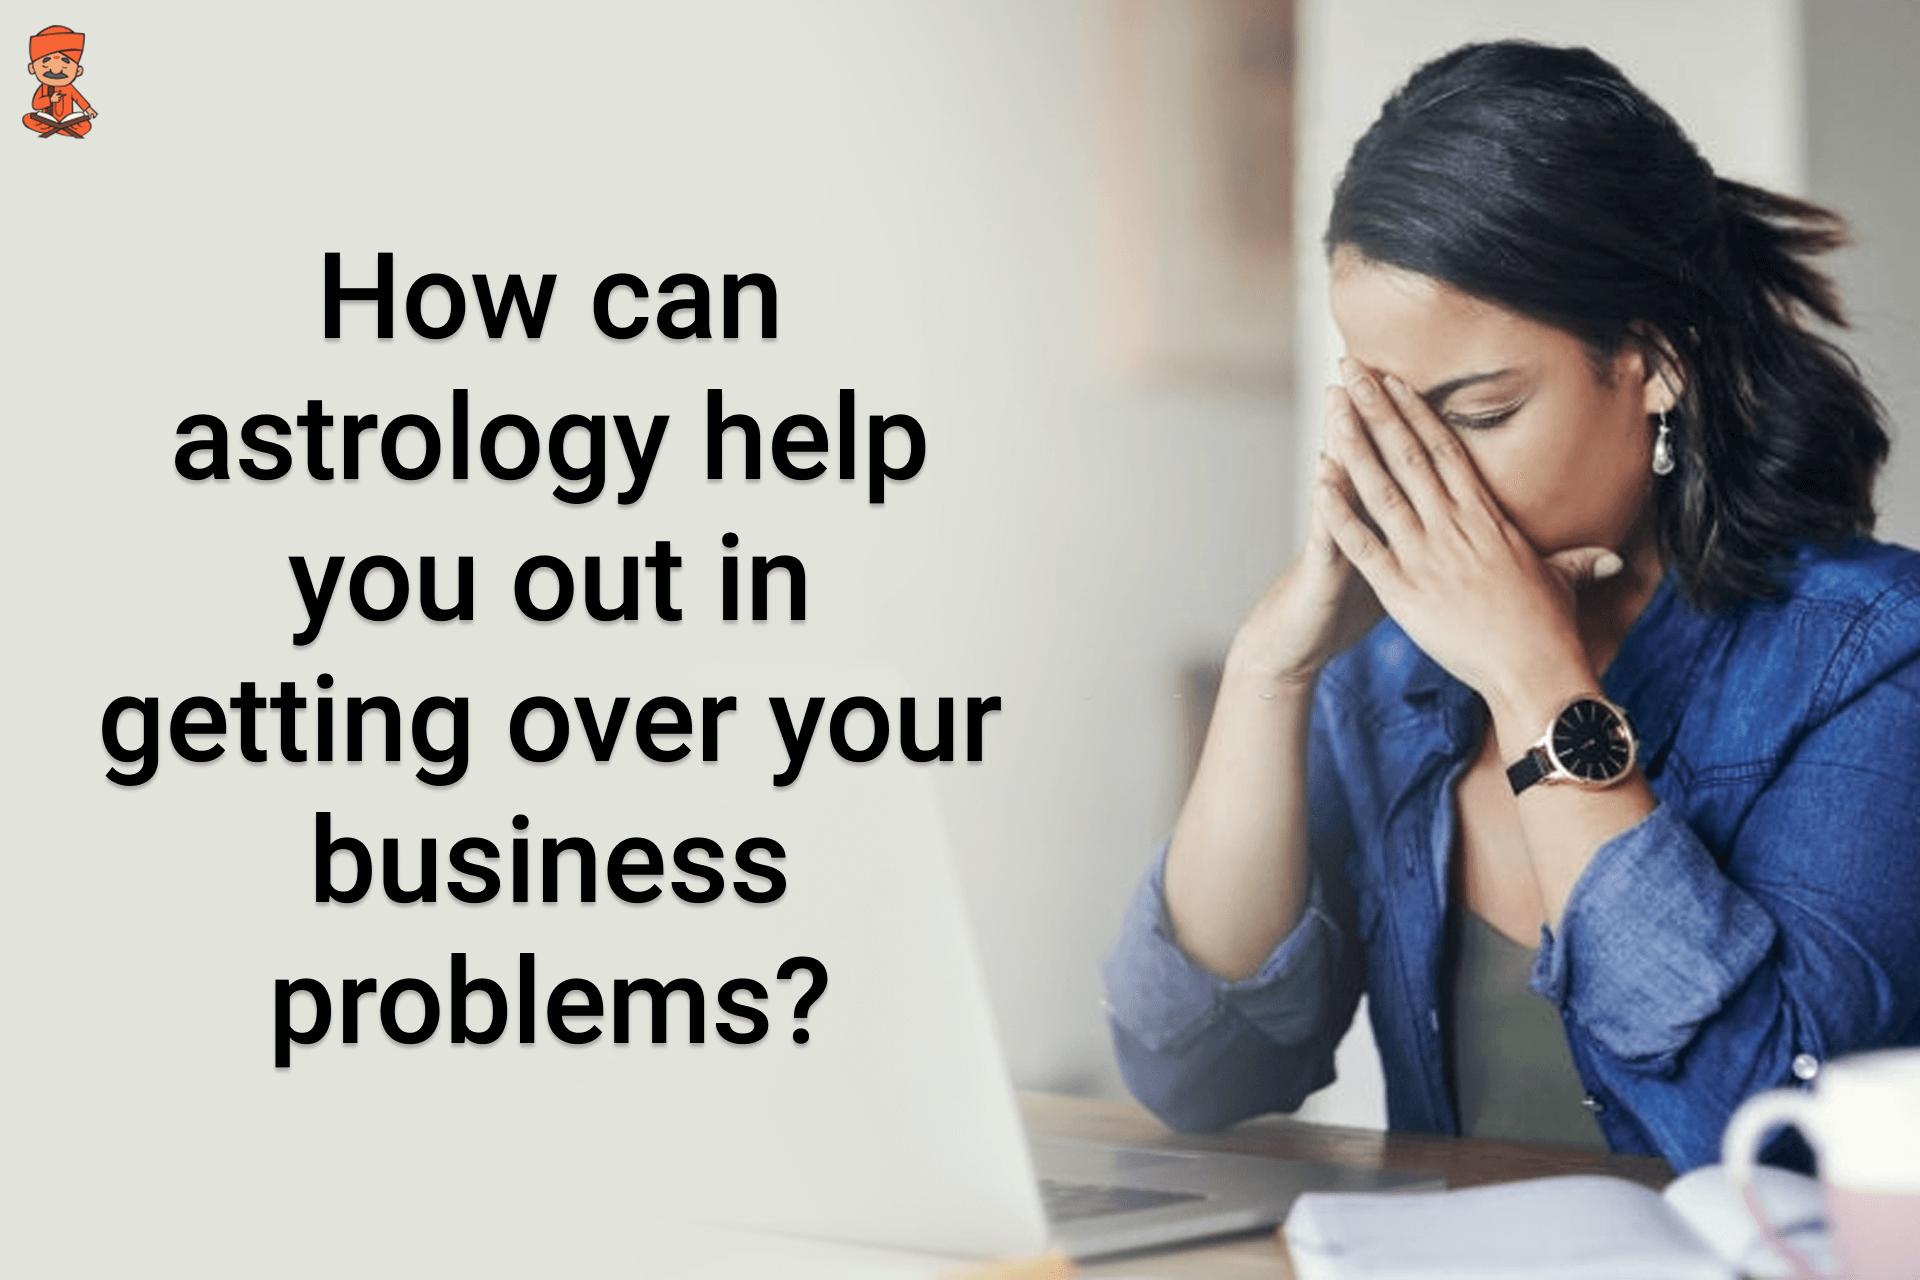 How Can Astrology Help You Out In Getting Over Your Business Problems?